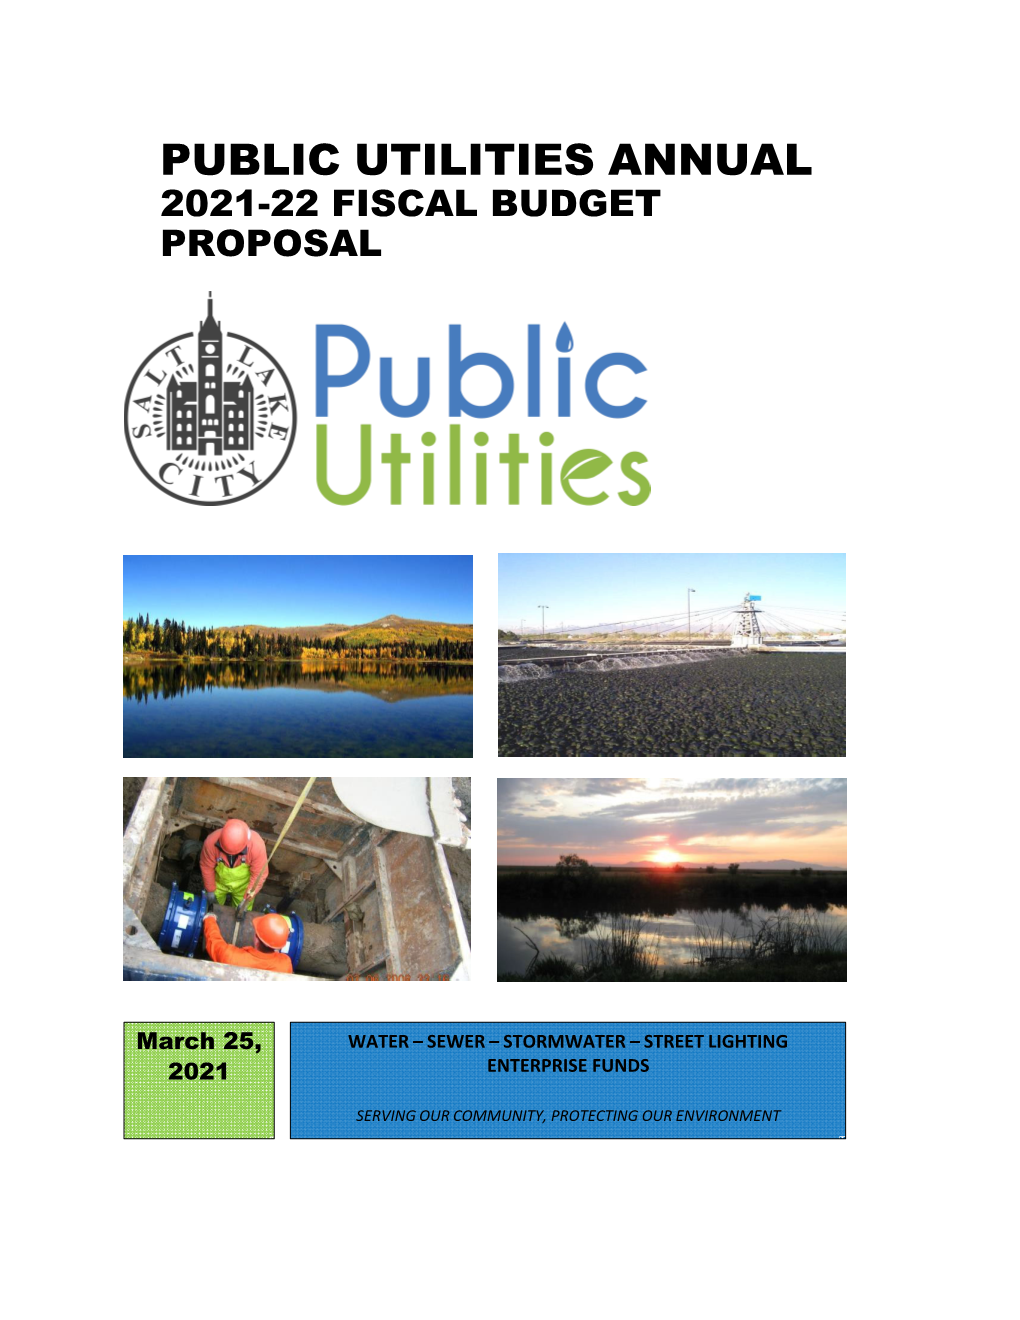 Public Utilities Annual 2021-22 Fiscal Budget Proposal